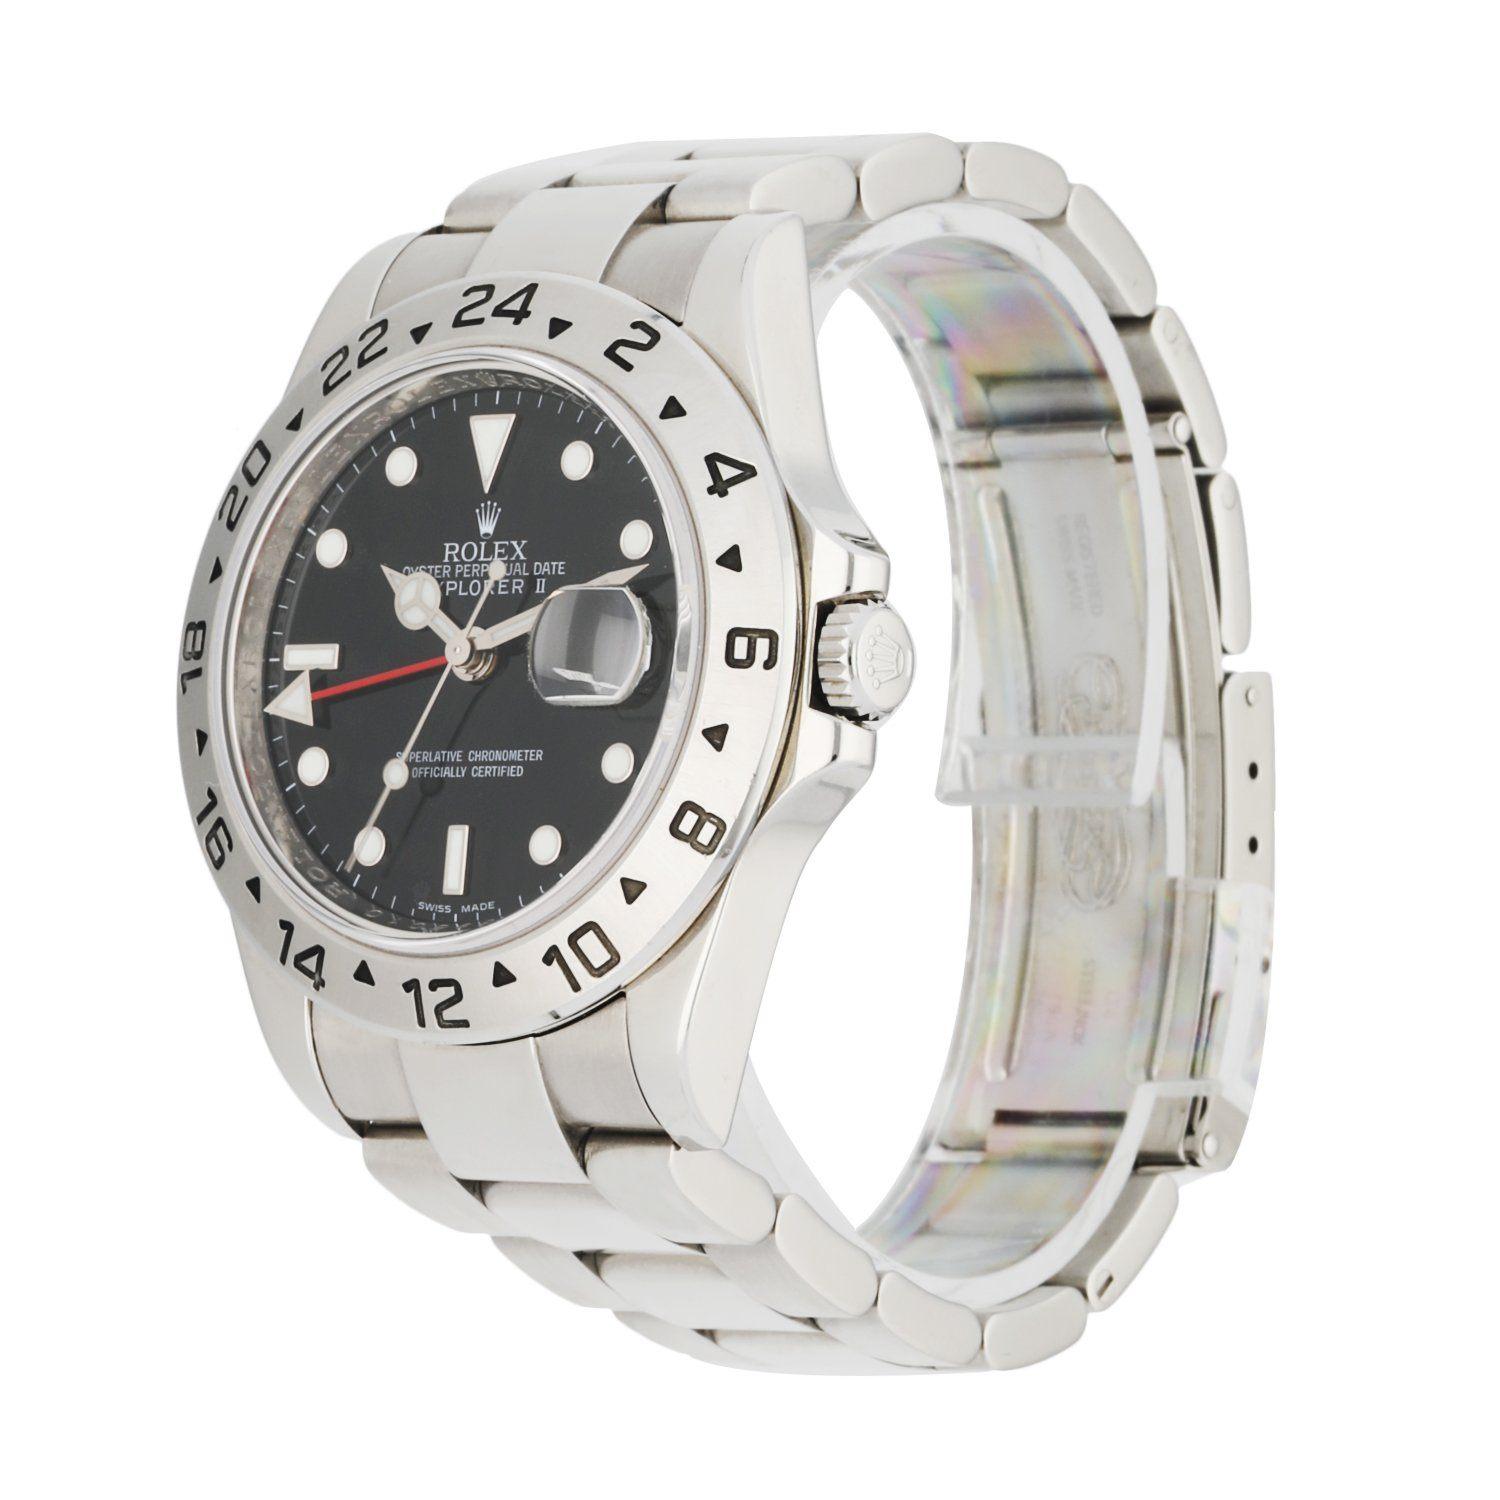 Rolex Explorer II 16570 Men's Watch. 40mm Stainless Steel case. Stainless Steel 24 Hour Time Display bezel. Black dial with Luminous Steel hands and luminous dot hour markers. Minute markers on the outer dial. Date display at the 3 o'clock position.